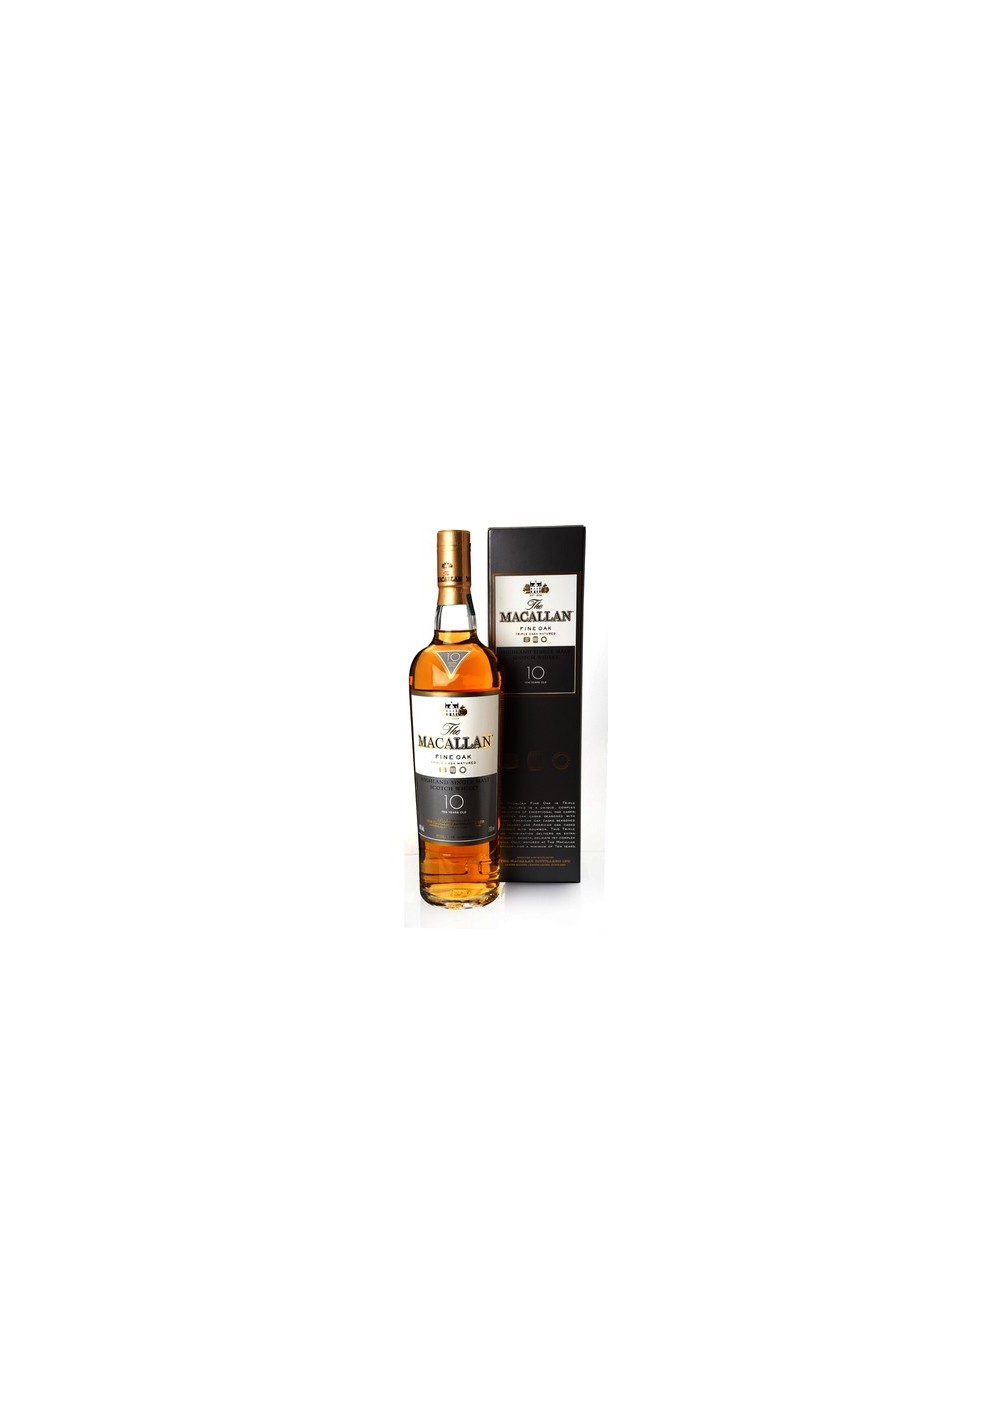 The Macallan 10 Year old Whisky